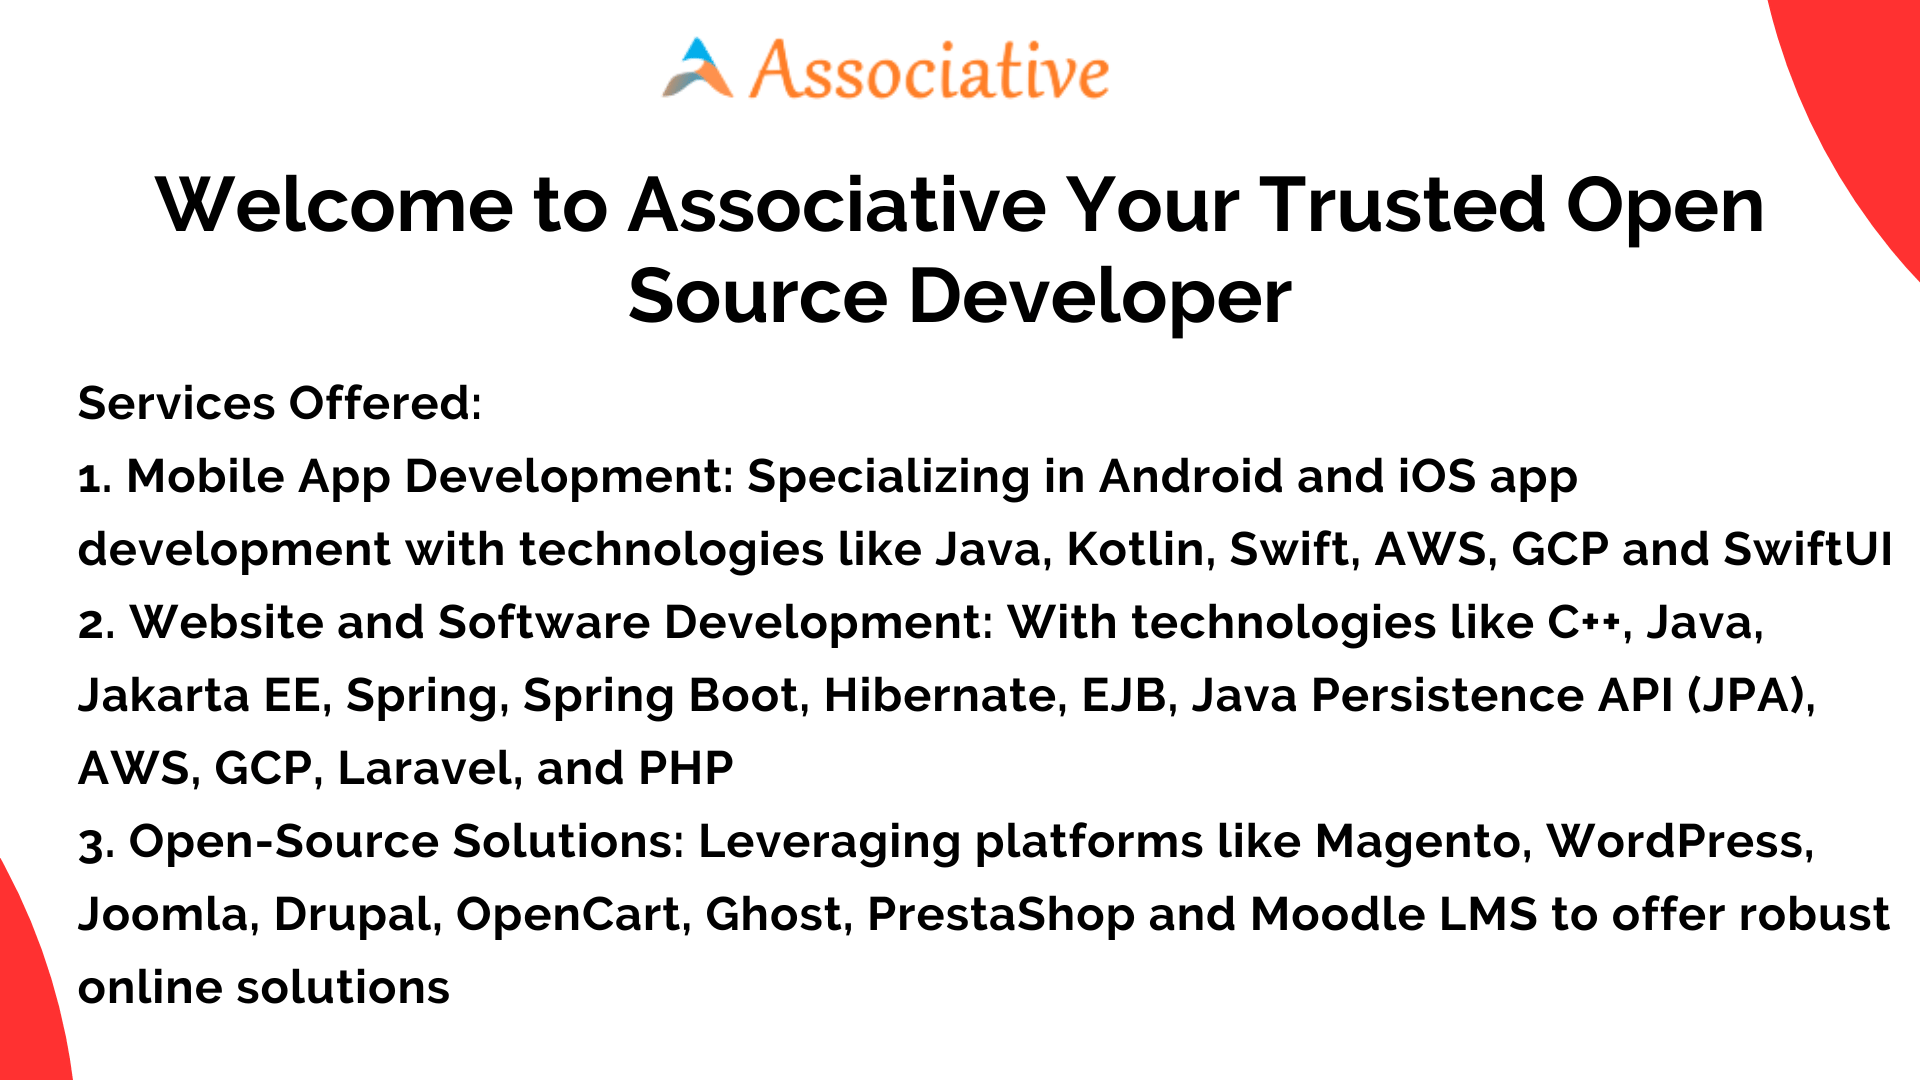 Welcome to Associative Your Trusted Open Source Developer